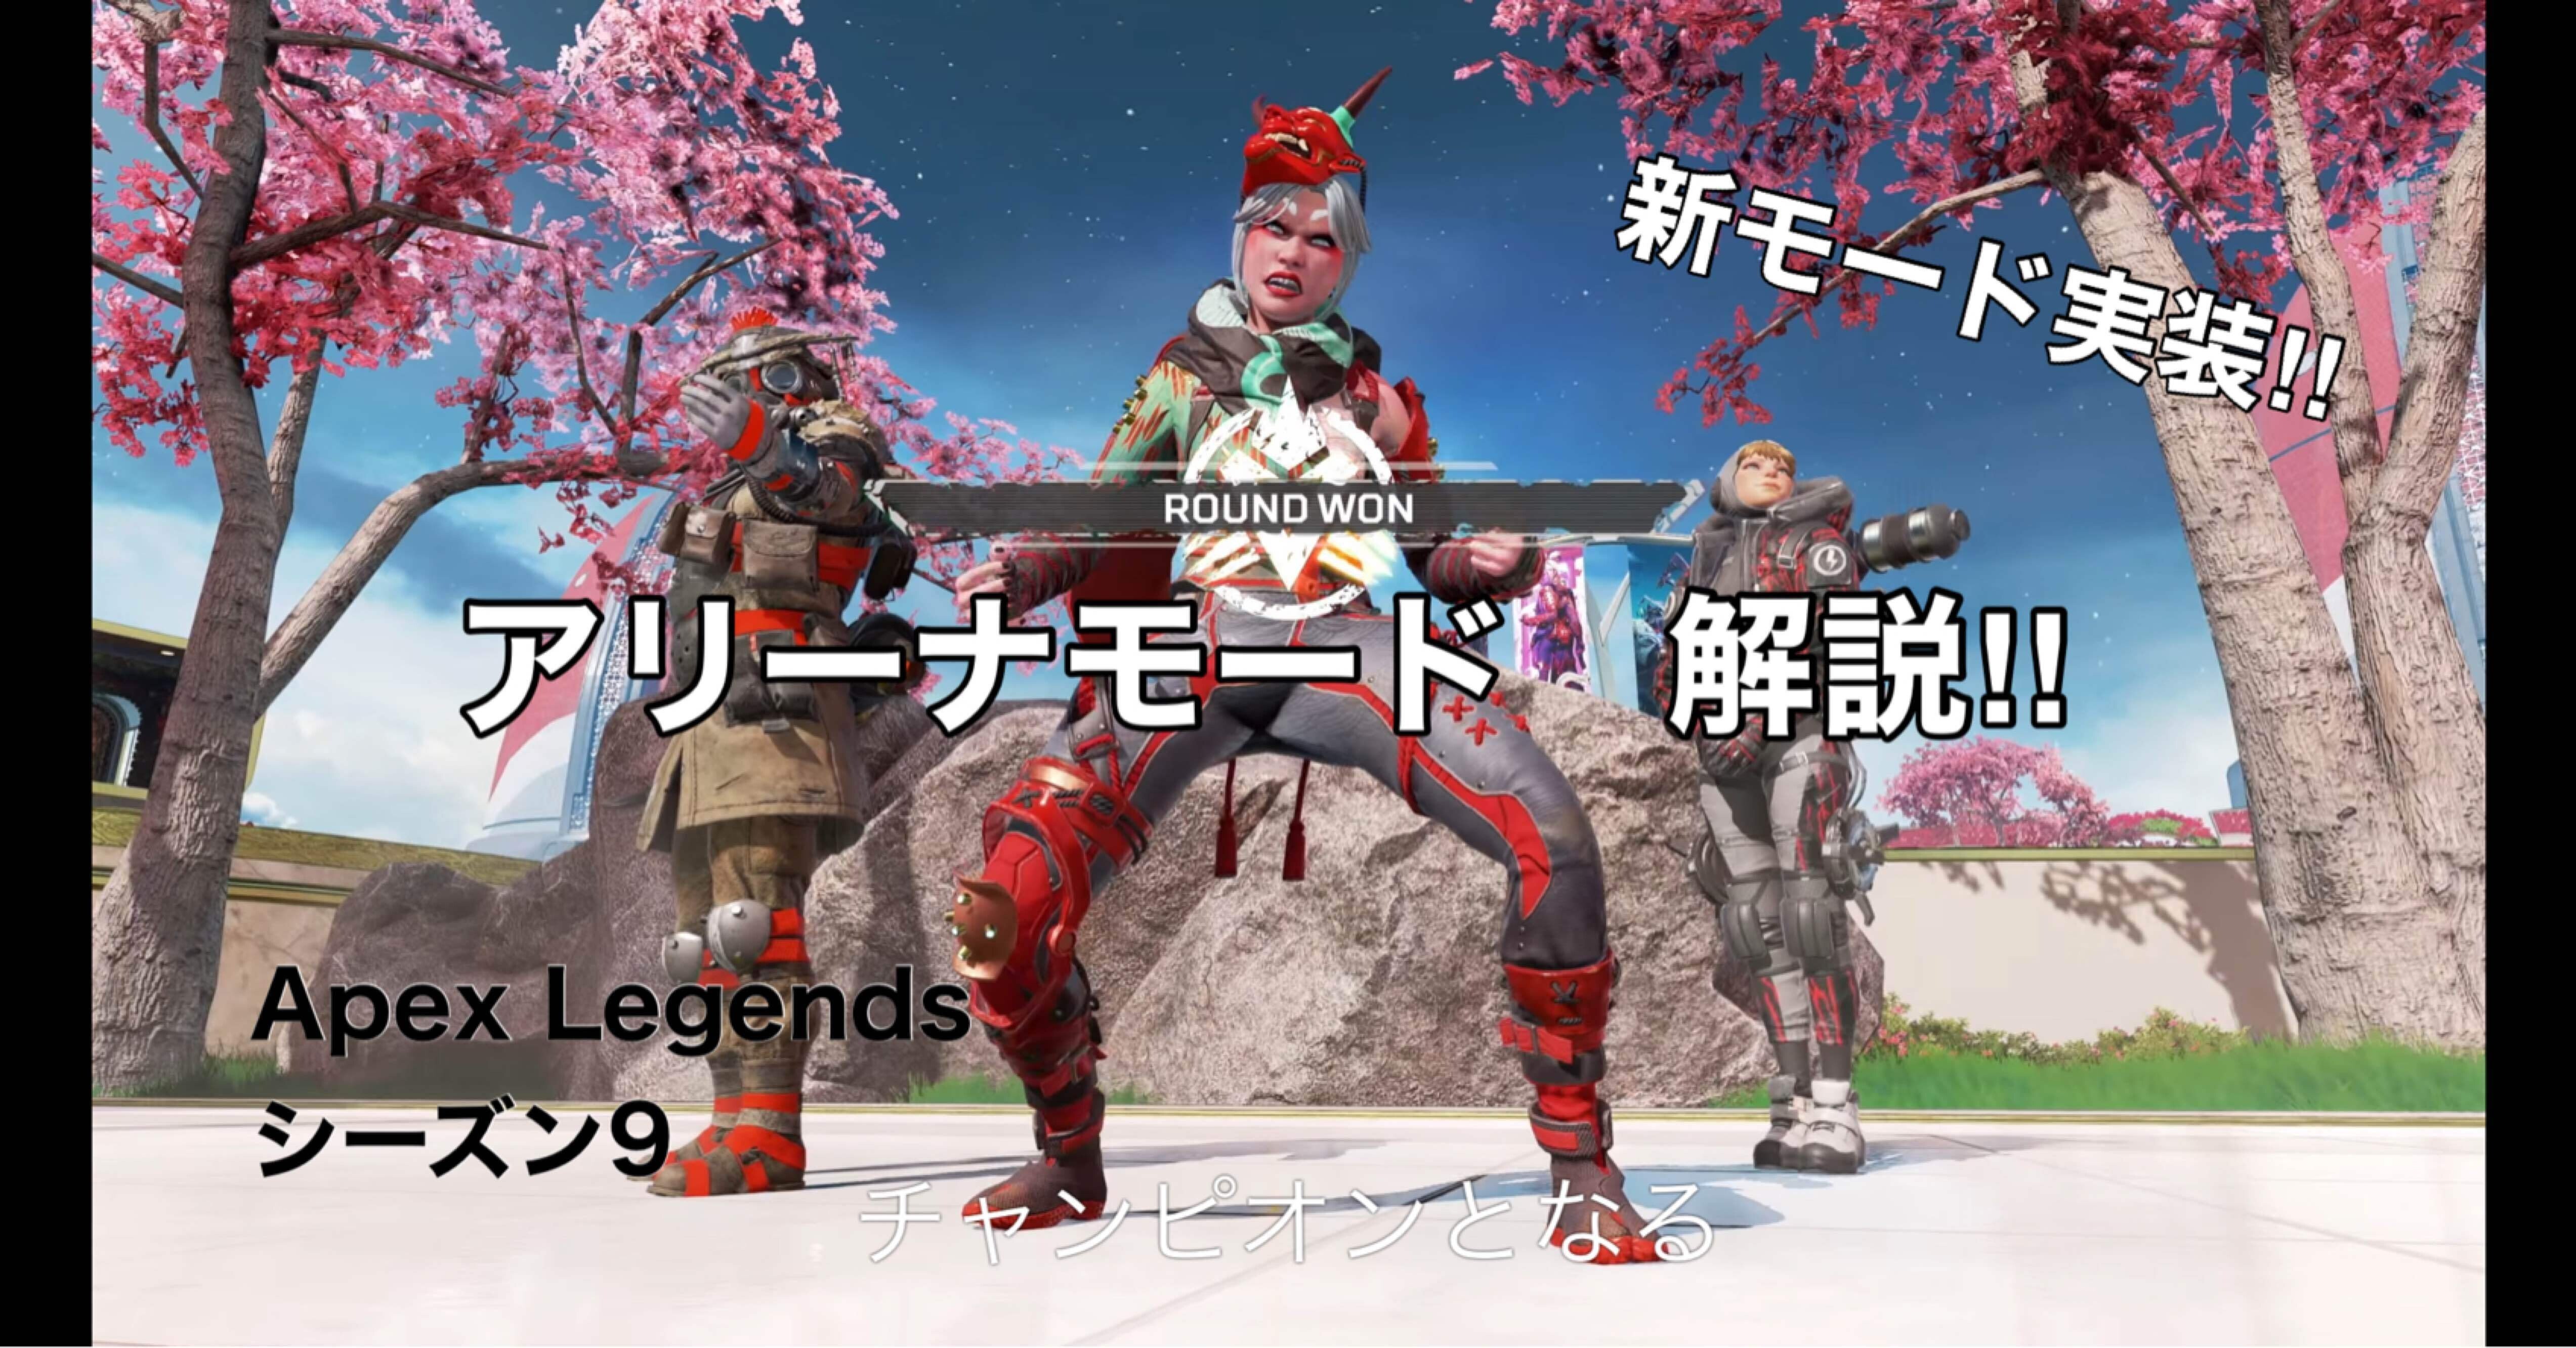 Apex Legends シーズン9 新モード アリーナモード解説 Hys ひす 11 29 Note Creator S Cup Note